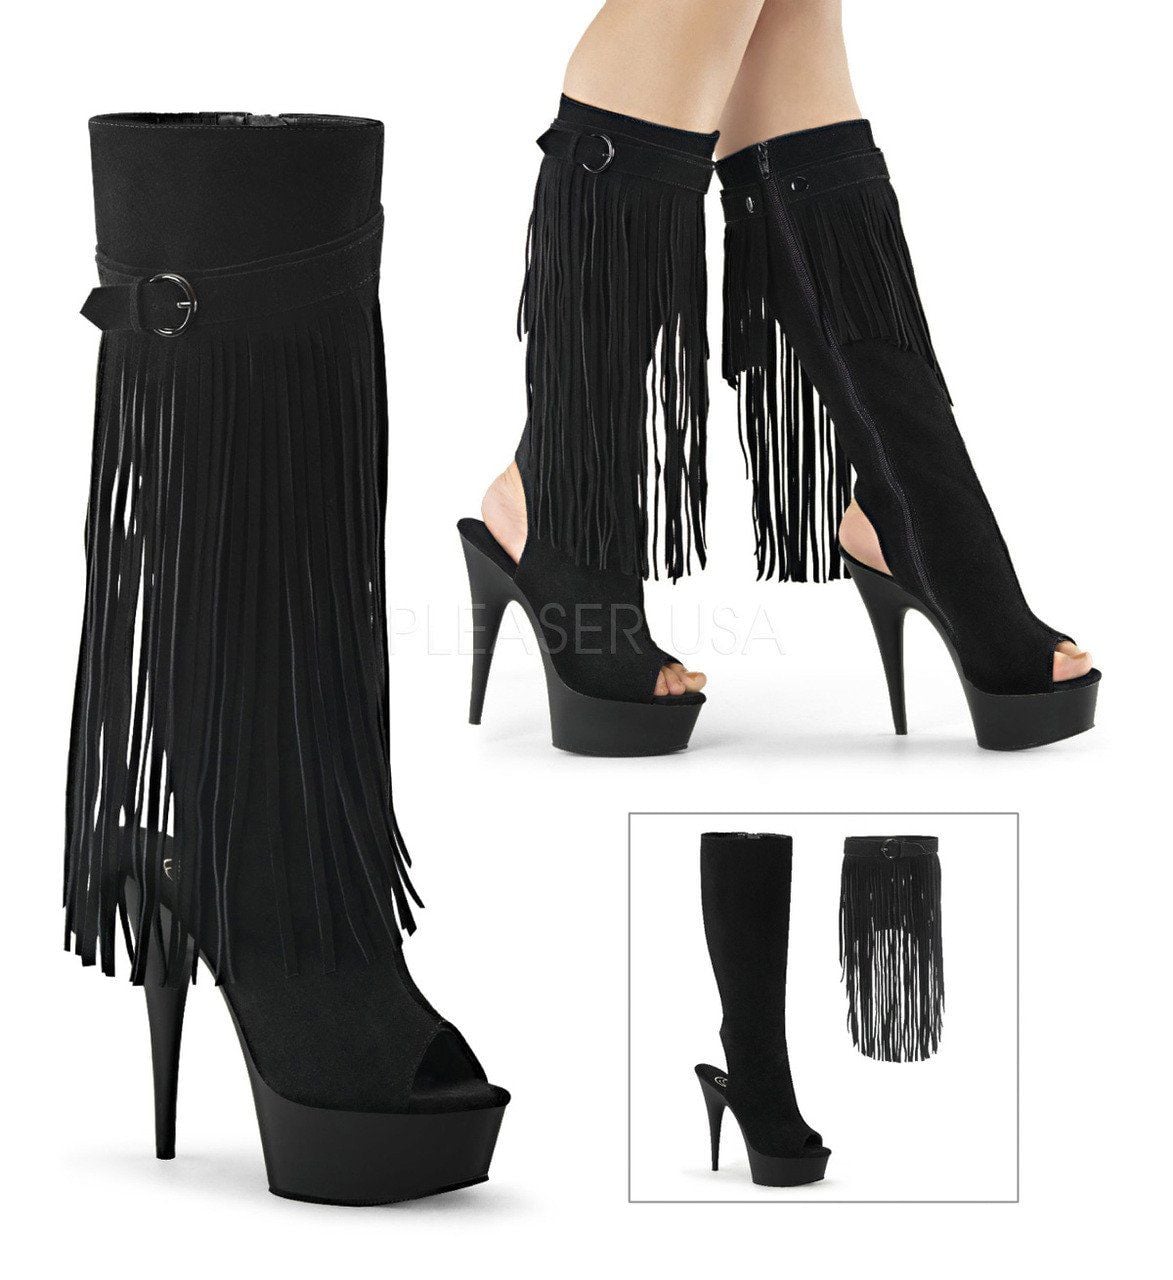 A stylish pair of fringe-covered women's boots.